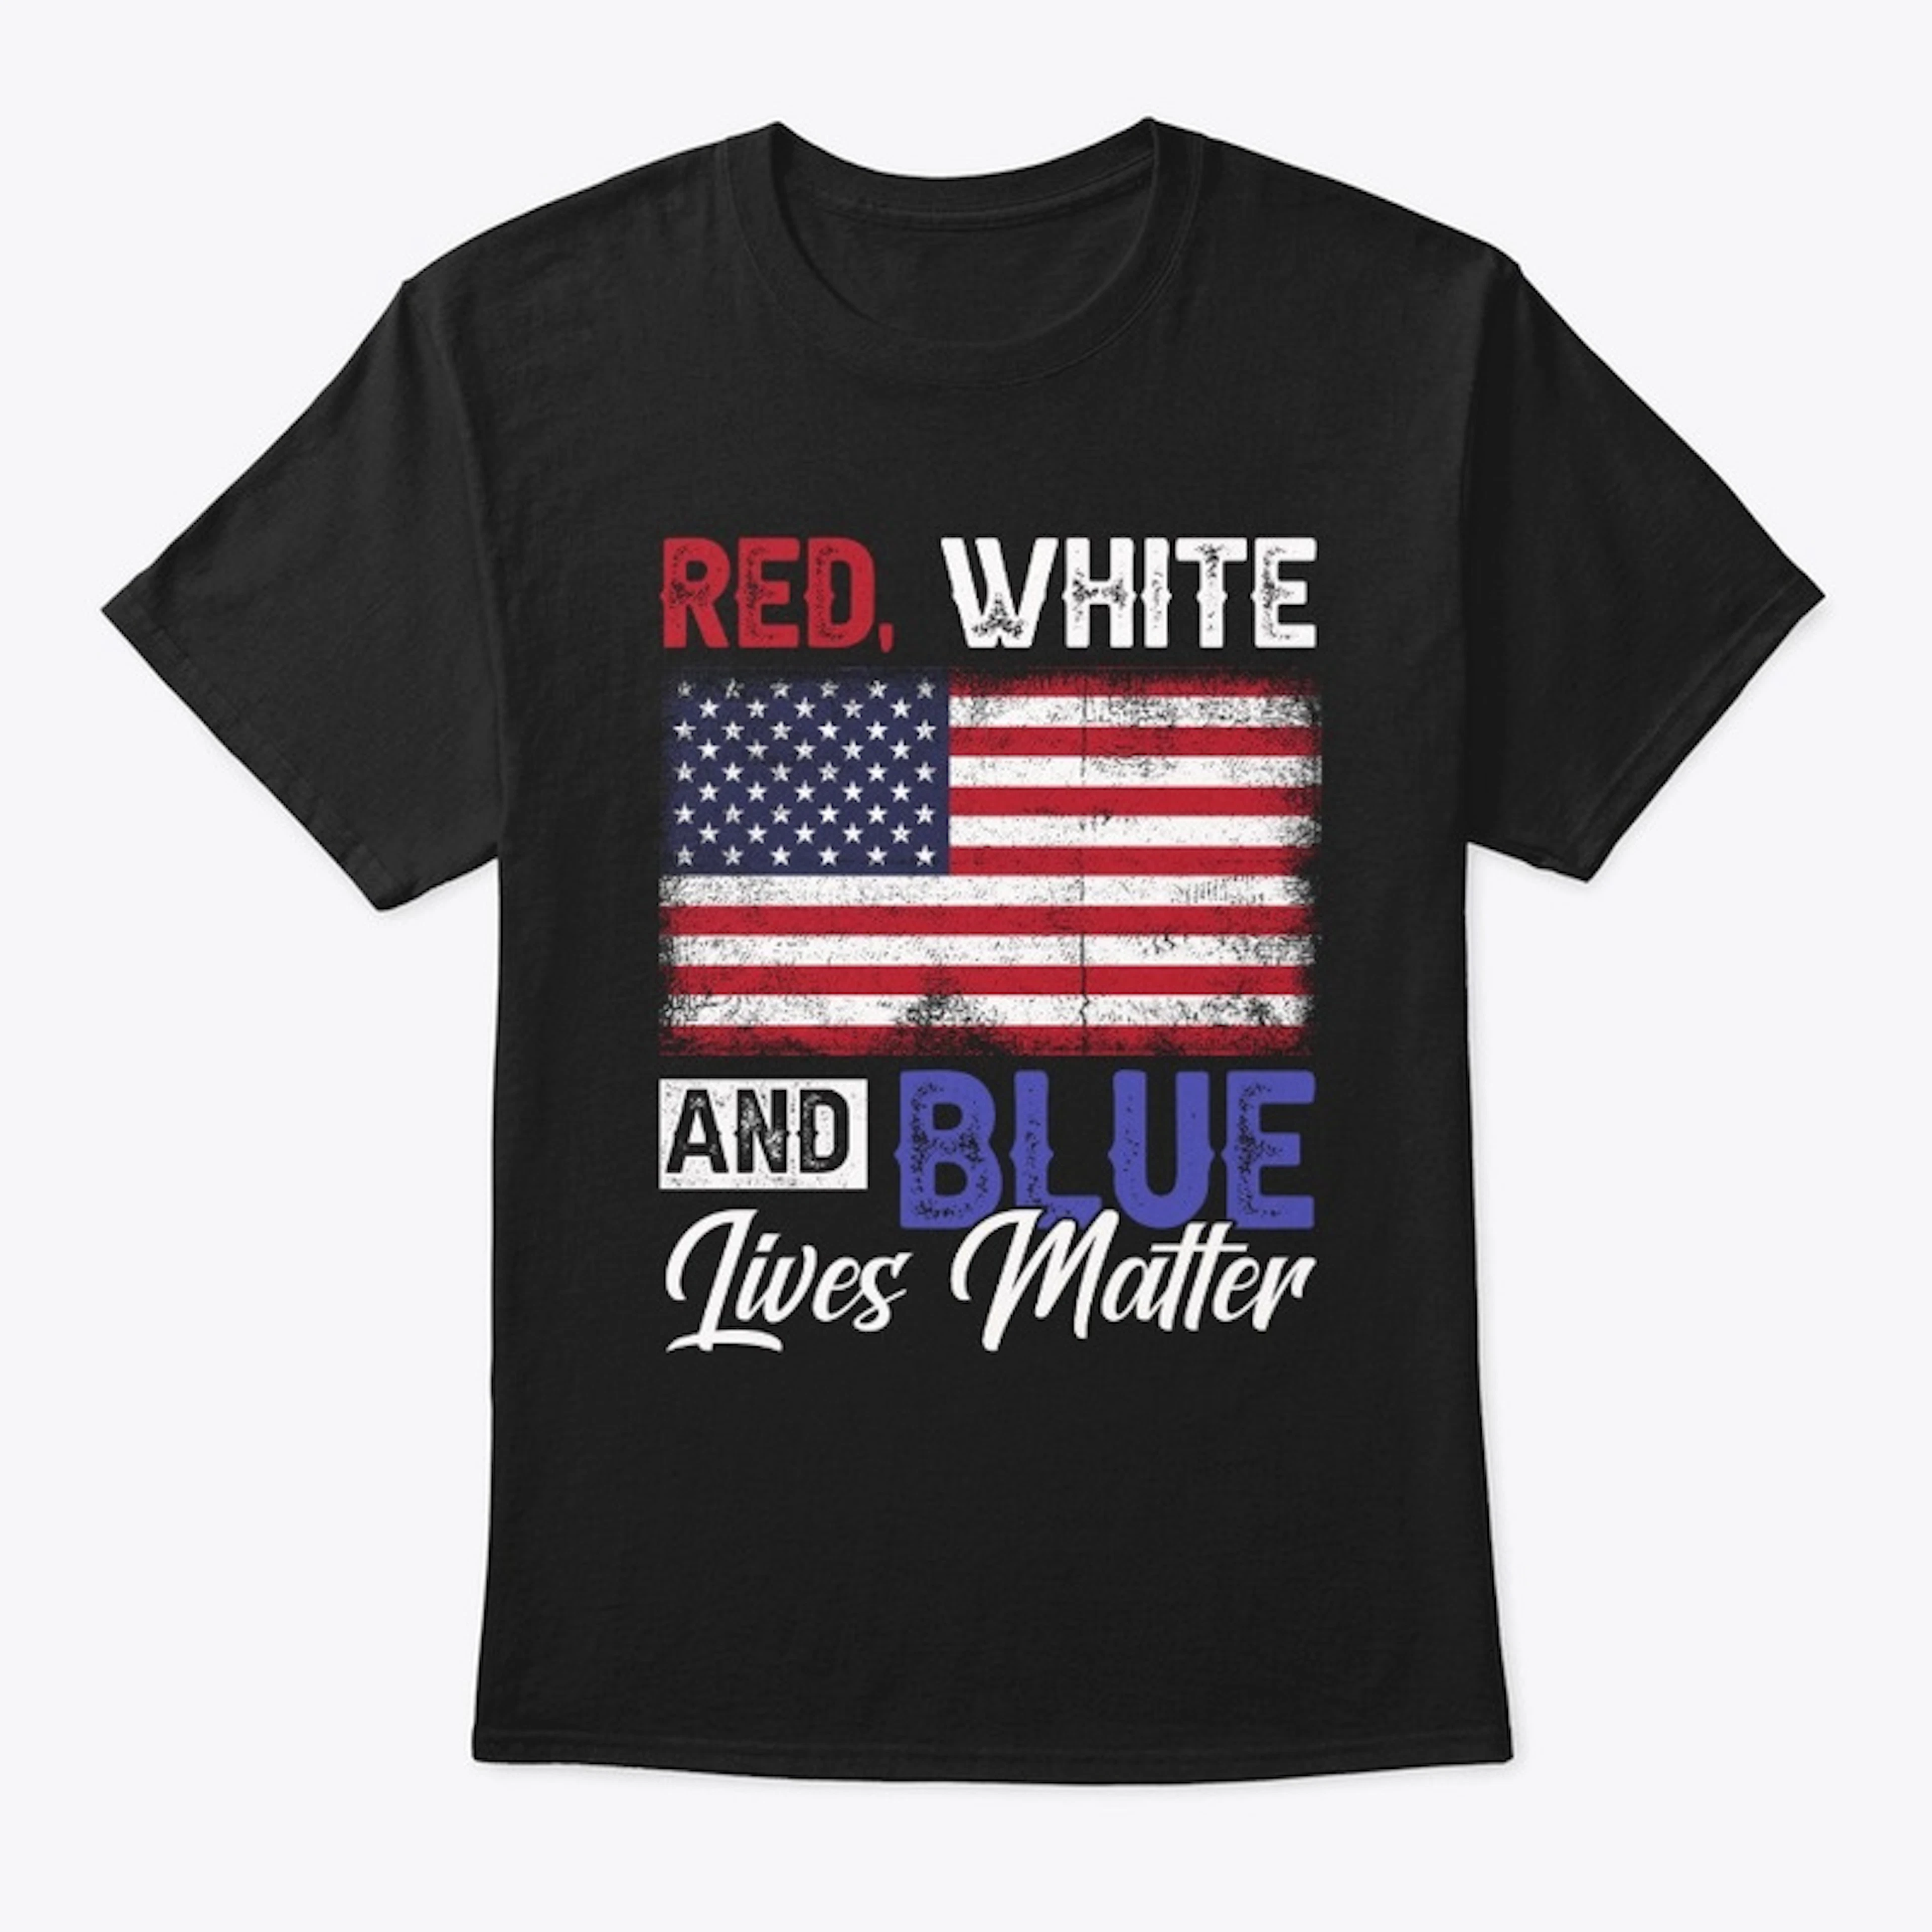 Red, White, And Blue Lives Matter